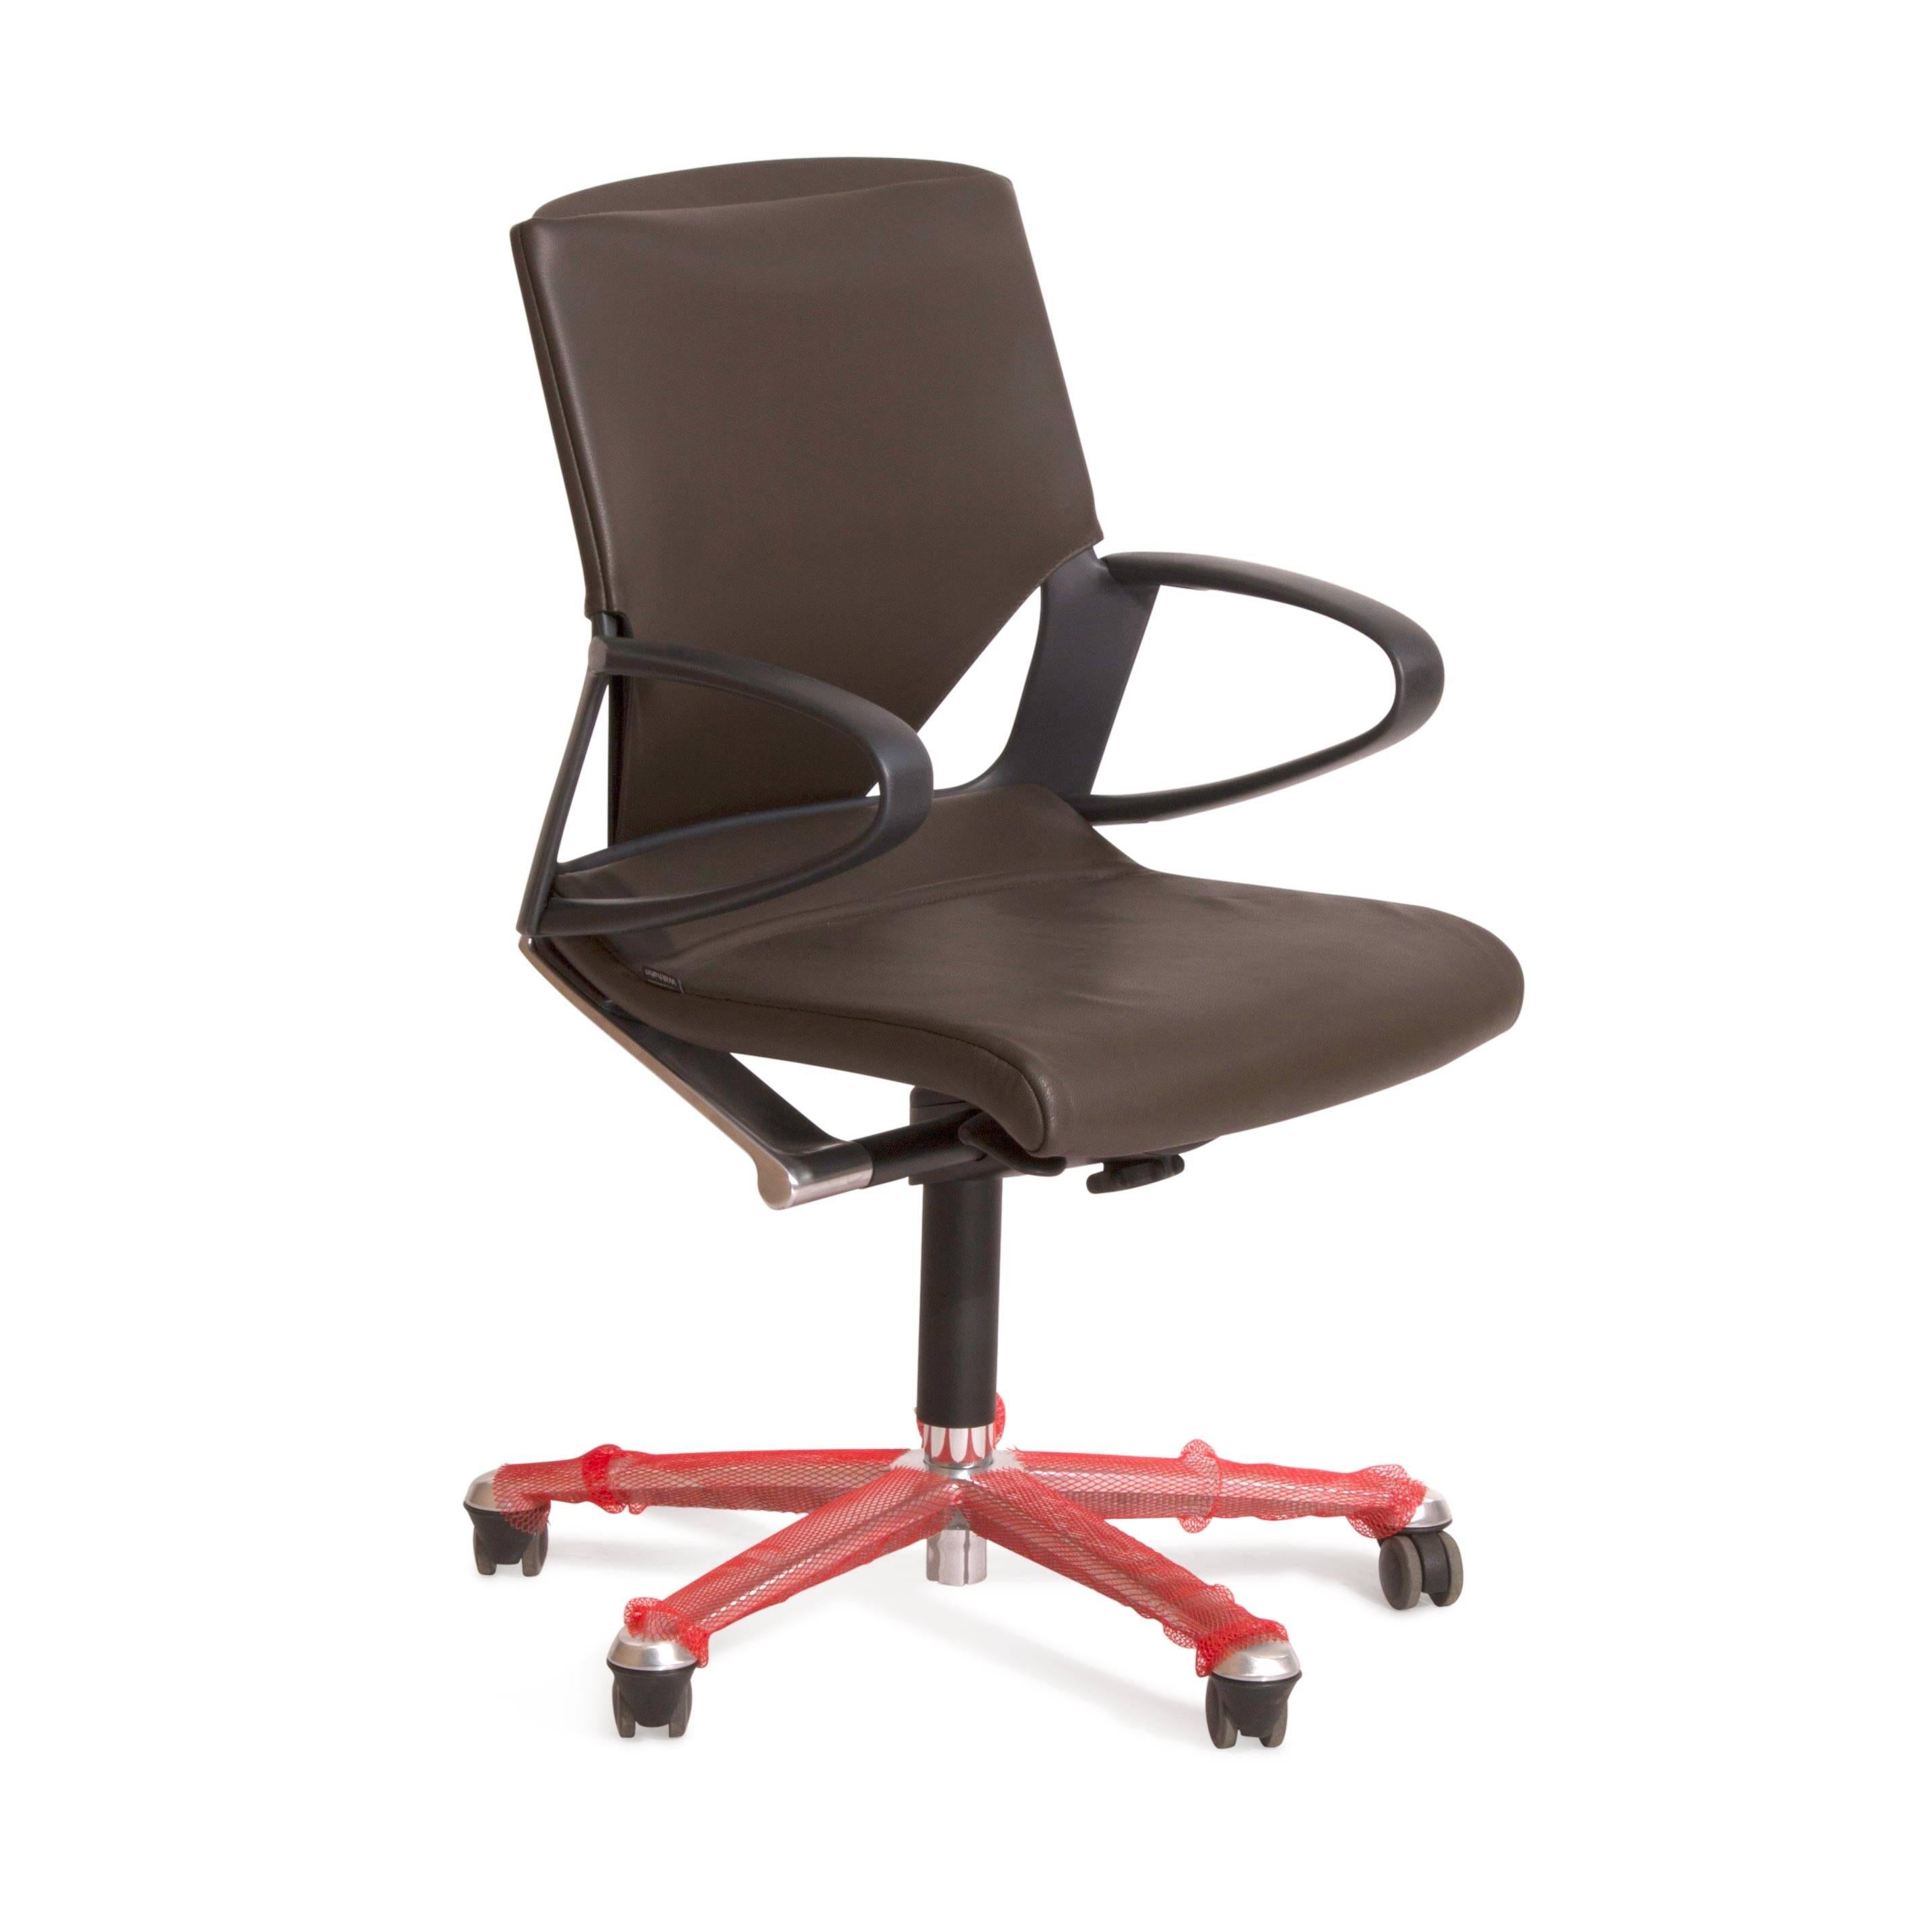 An innovative look. Suitably prestigious. Excellent comfort. What area says more about corporate culture than executive offices? Which is why prestige and constant values enjoy high priority in this case. The Modus Medium range offers a wider seat